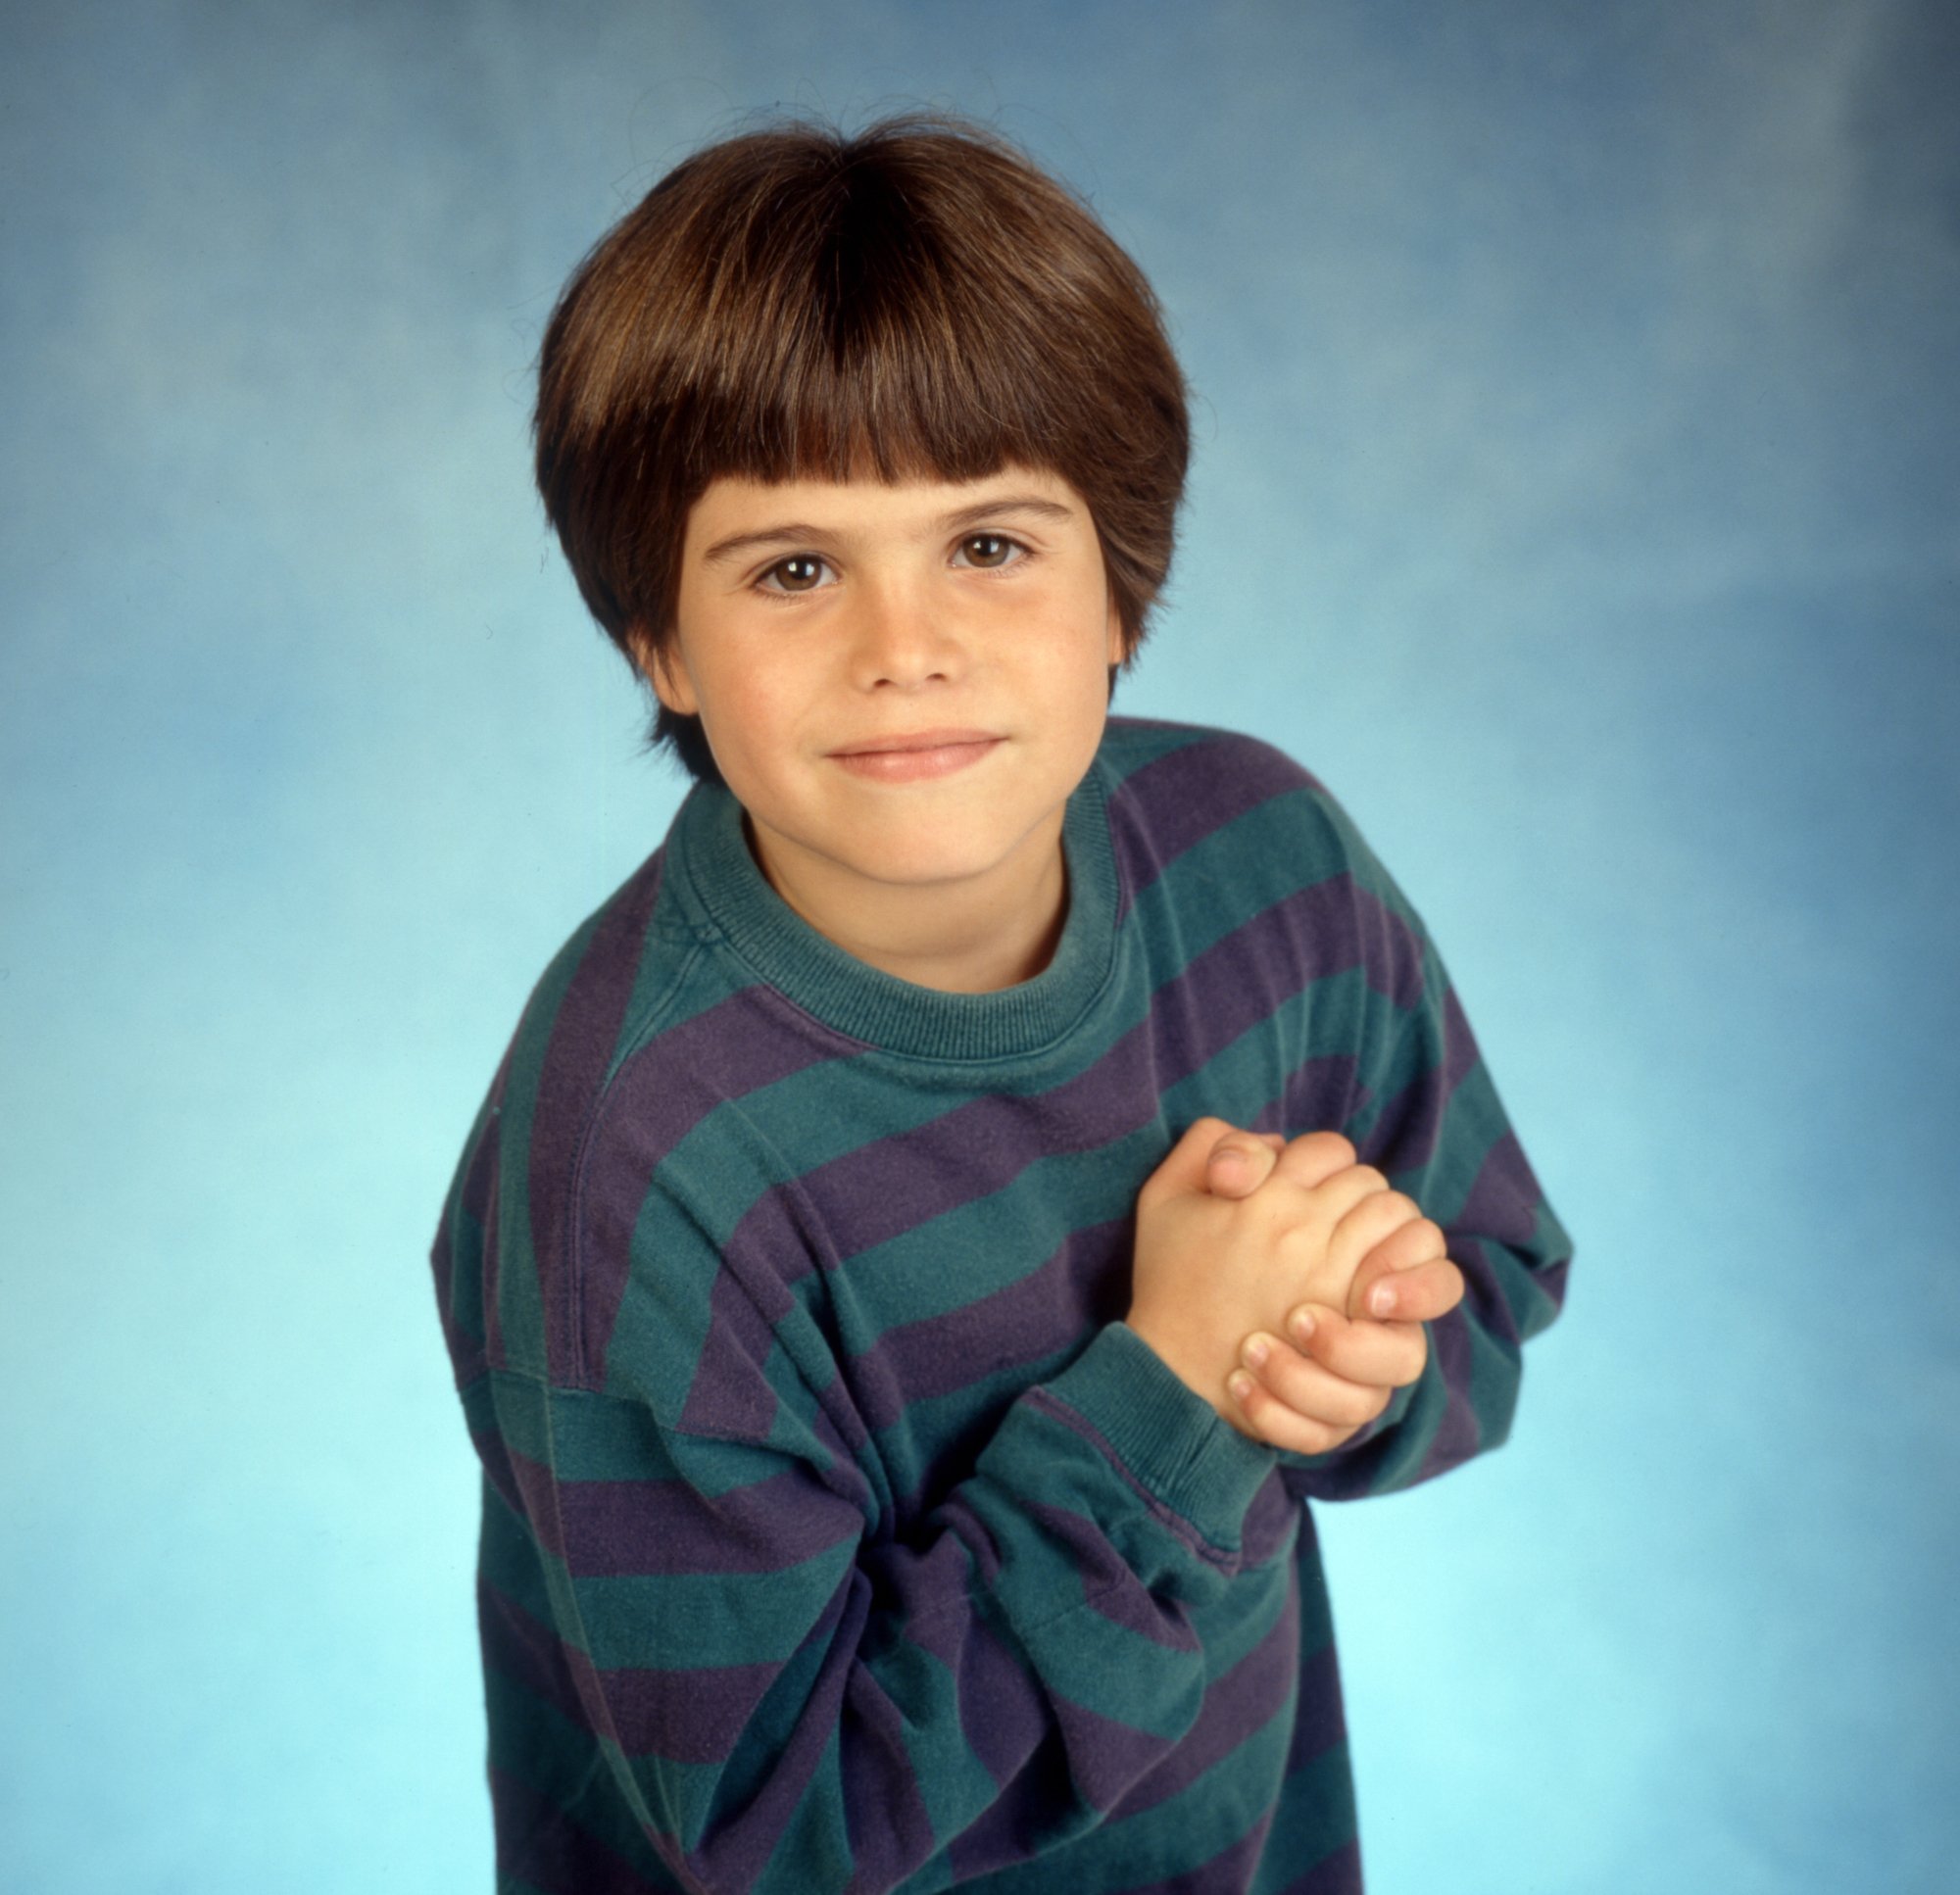 Ross Malinger as a child, 1993